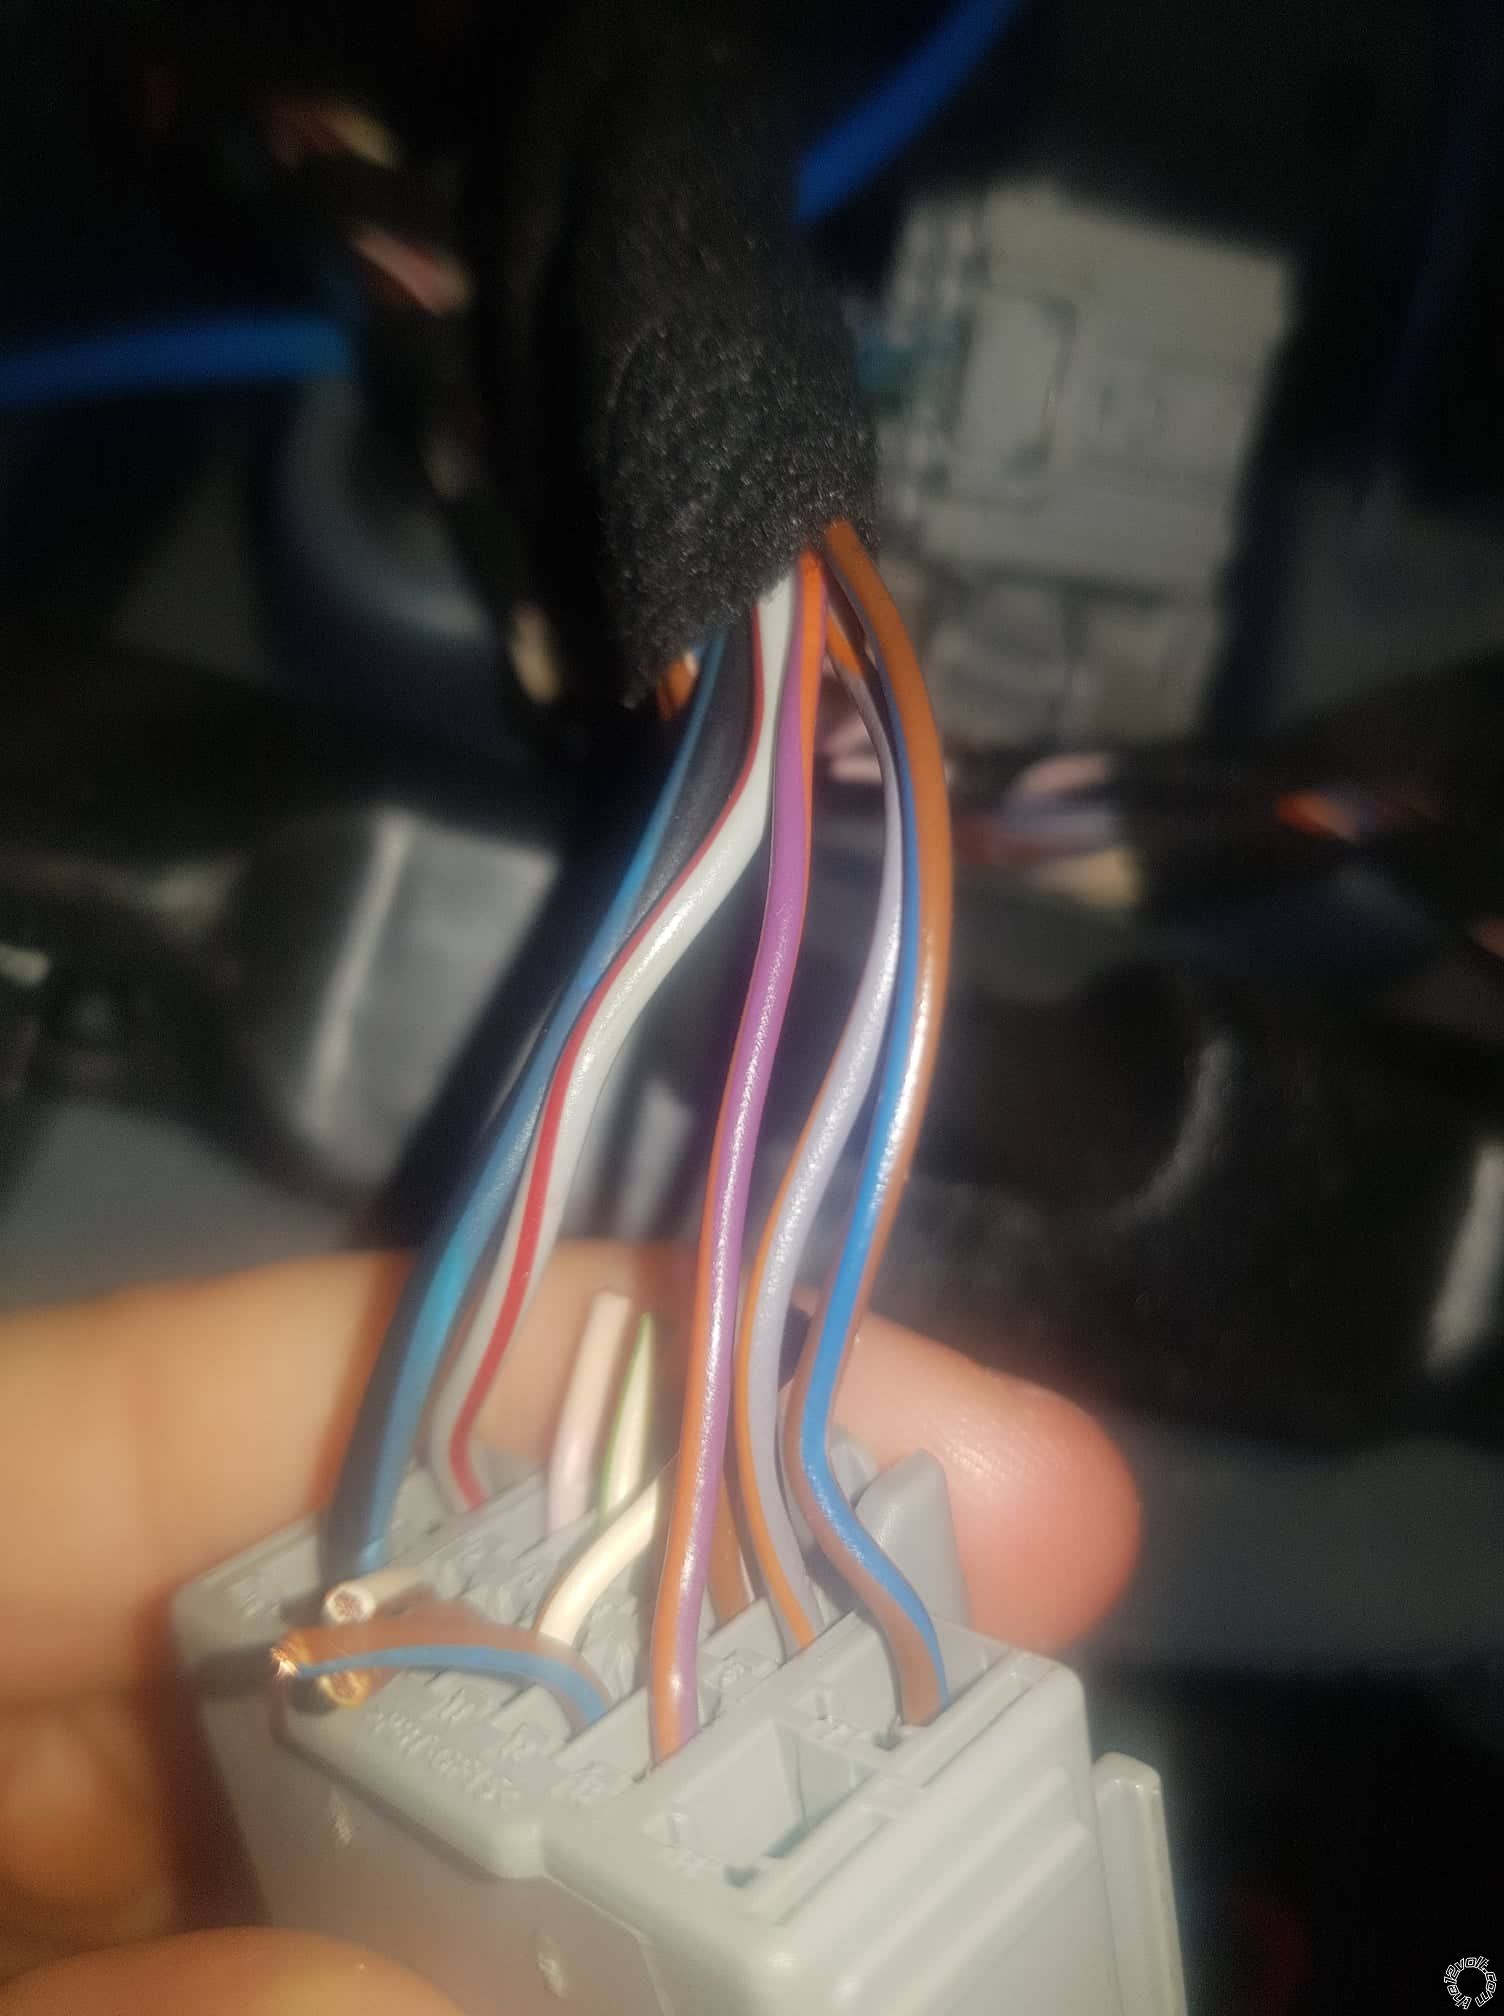 2009 Ford Fiesta WS Stereo Wiring - Last Post -- posted image.